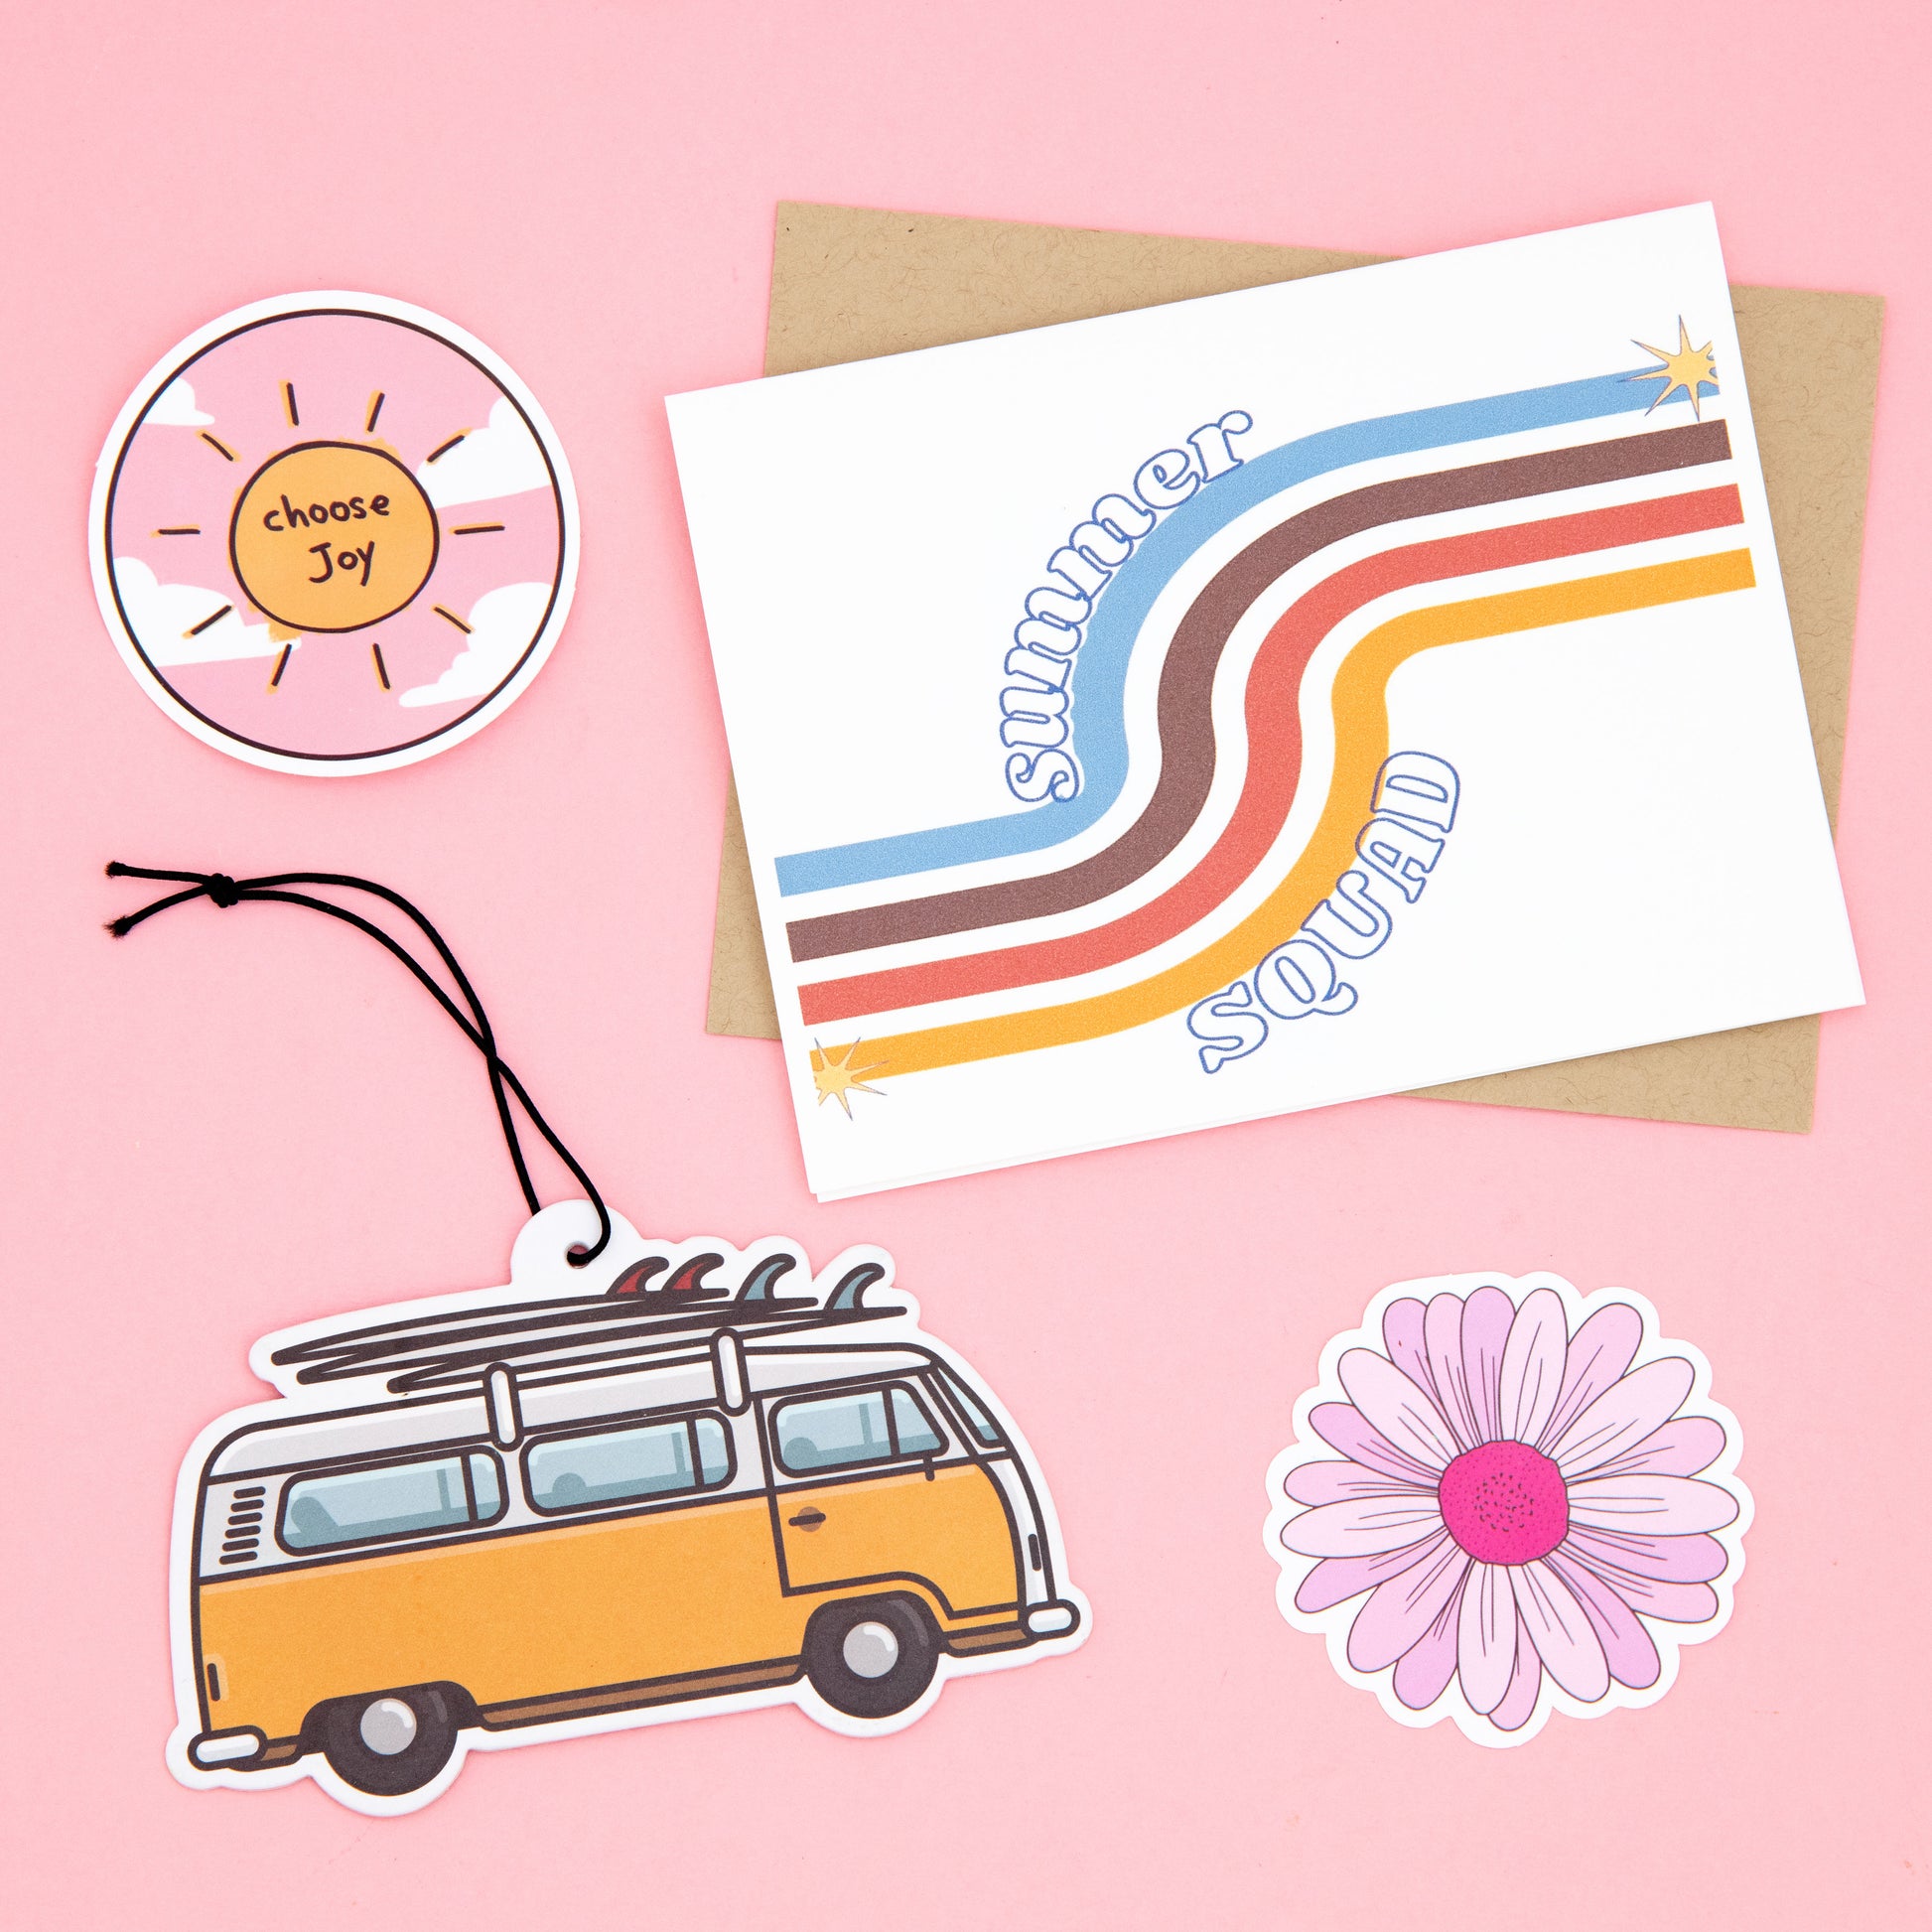 Get ready for summer with The Oddball Club's subscription box! This box includes a summer squad greeting card with a retro line pattern, brown envelope, flower sticker, sun sticker that says 'choose joy', and a vintage yellow van air freshener with surf boards. Perfect for beach lovers and summer enthusiasts.